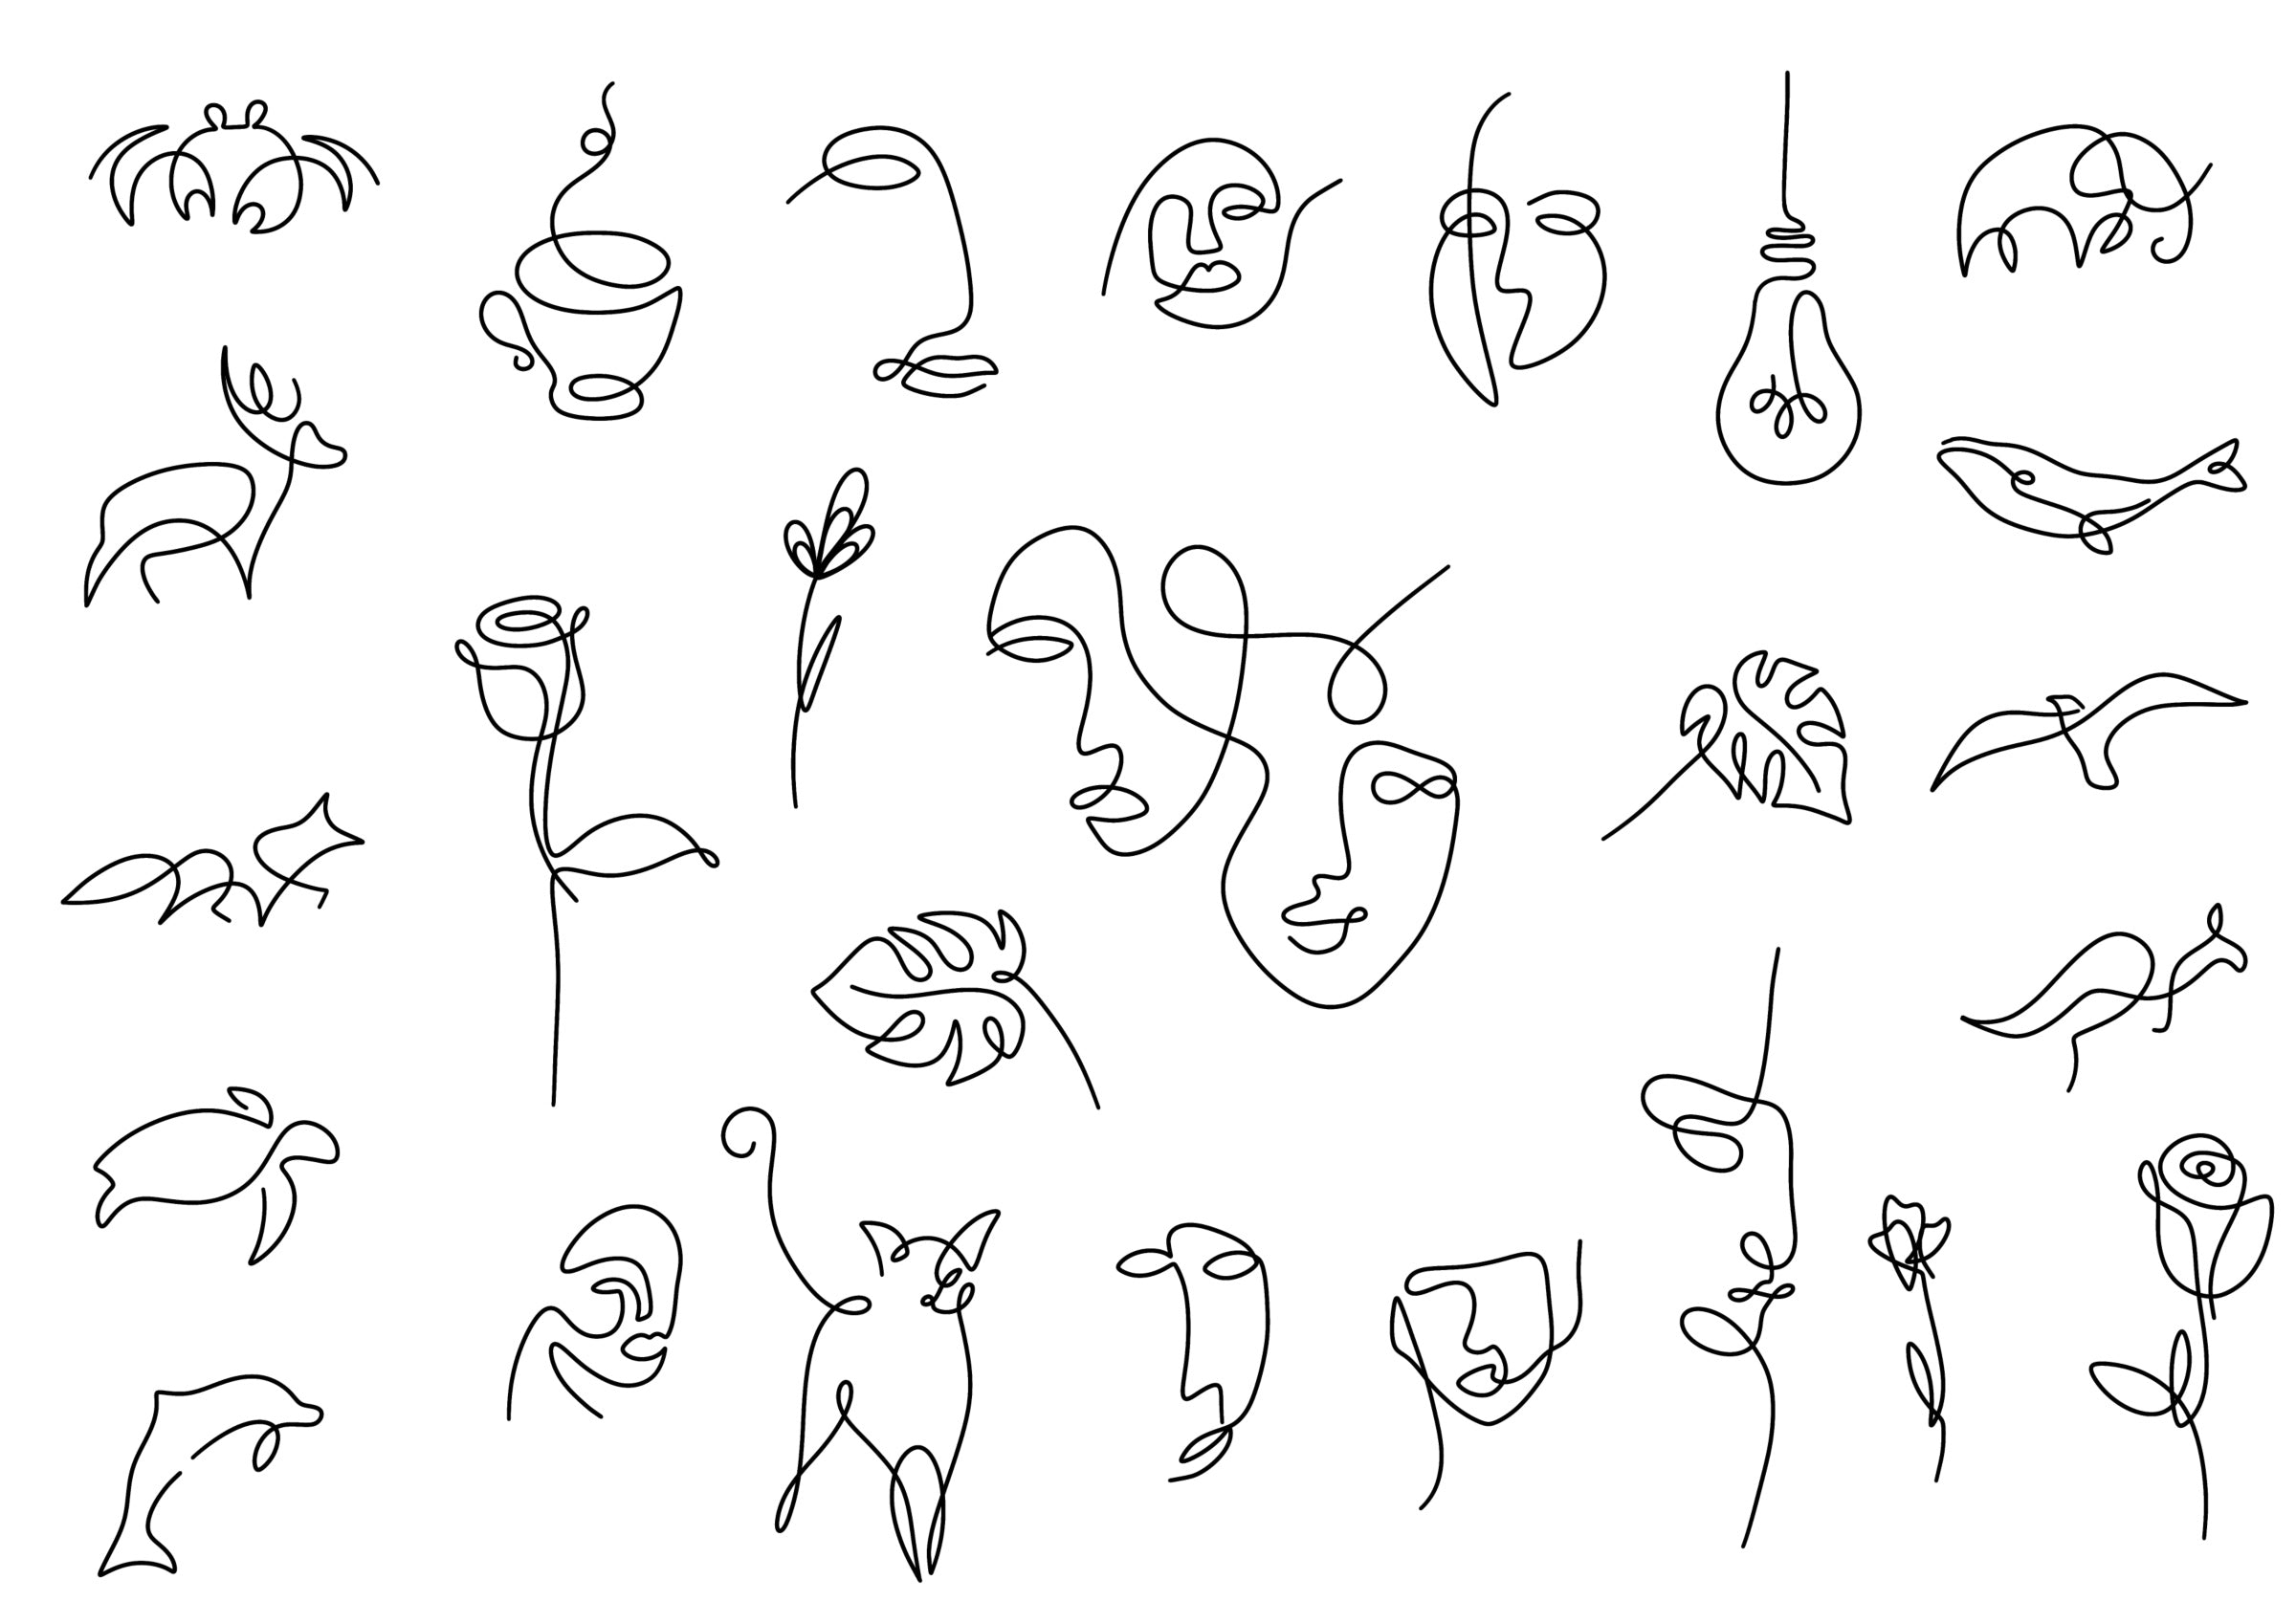 Continuous Line Drawings Stencils | Ready-to-use Pre-Printed Handpoke ...